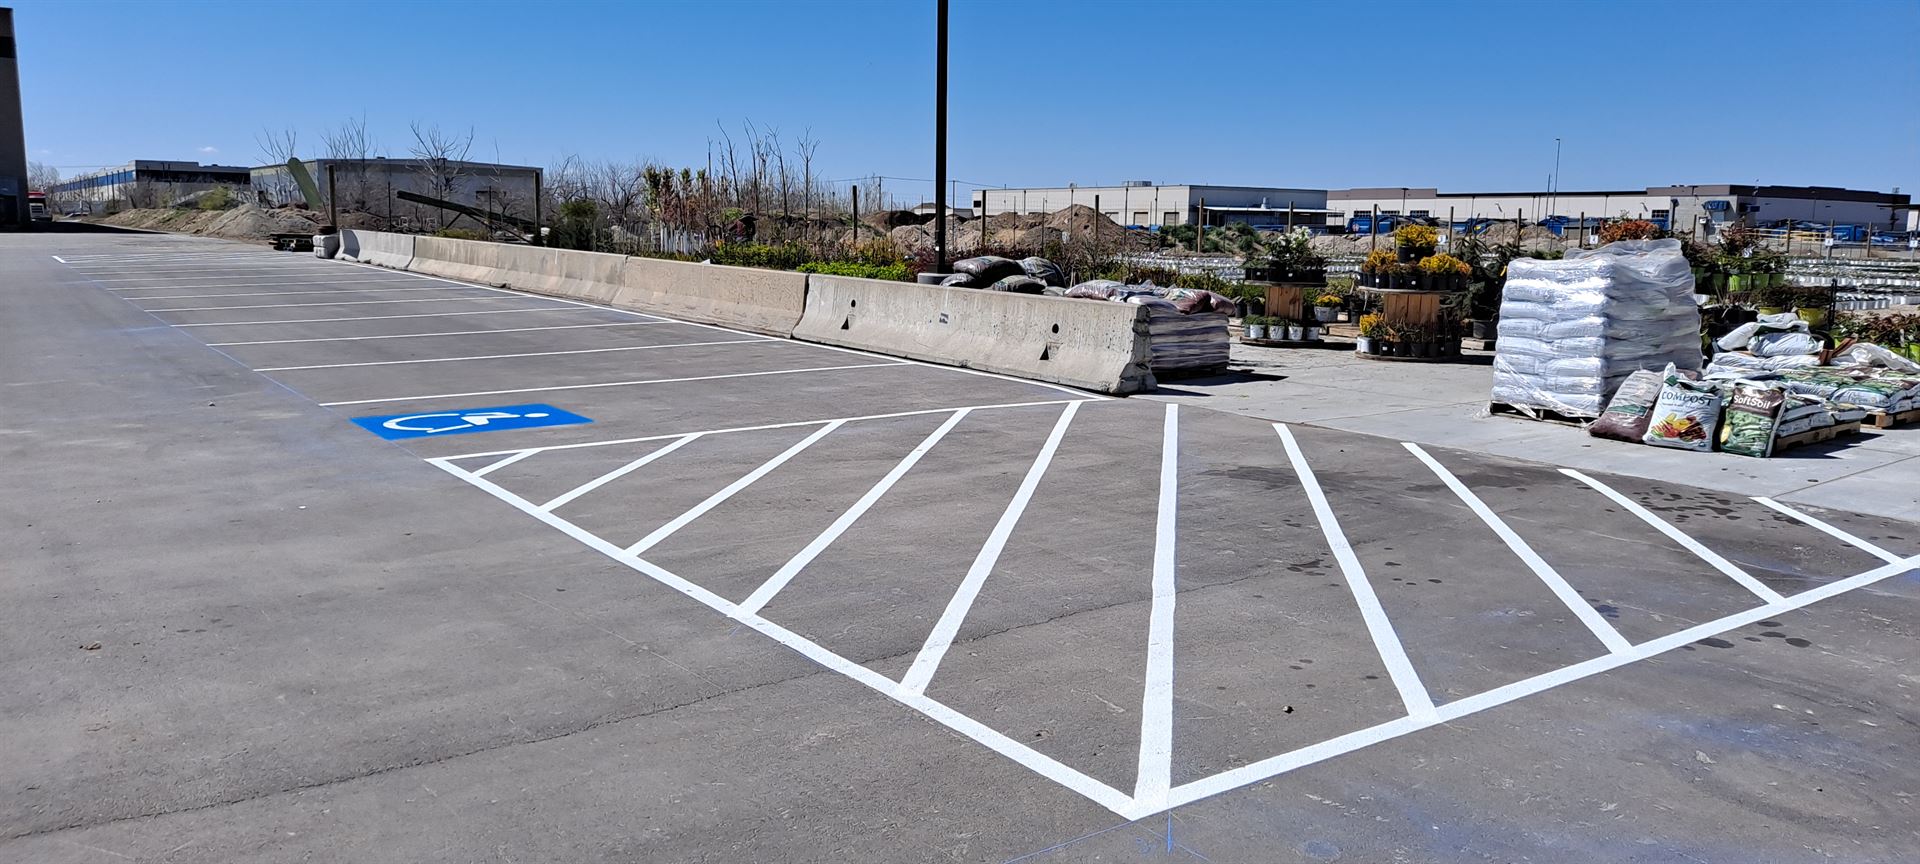 newly painted white lines in parking lot